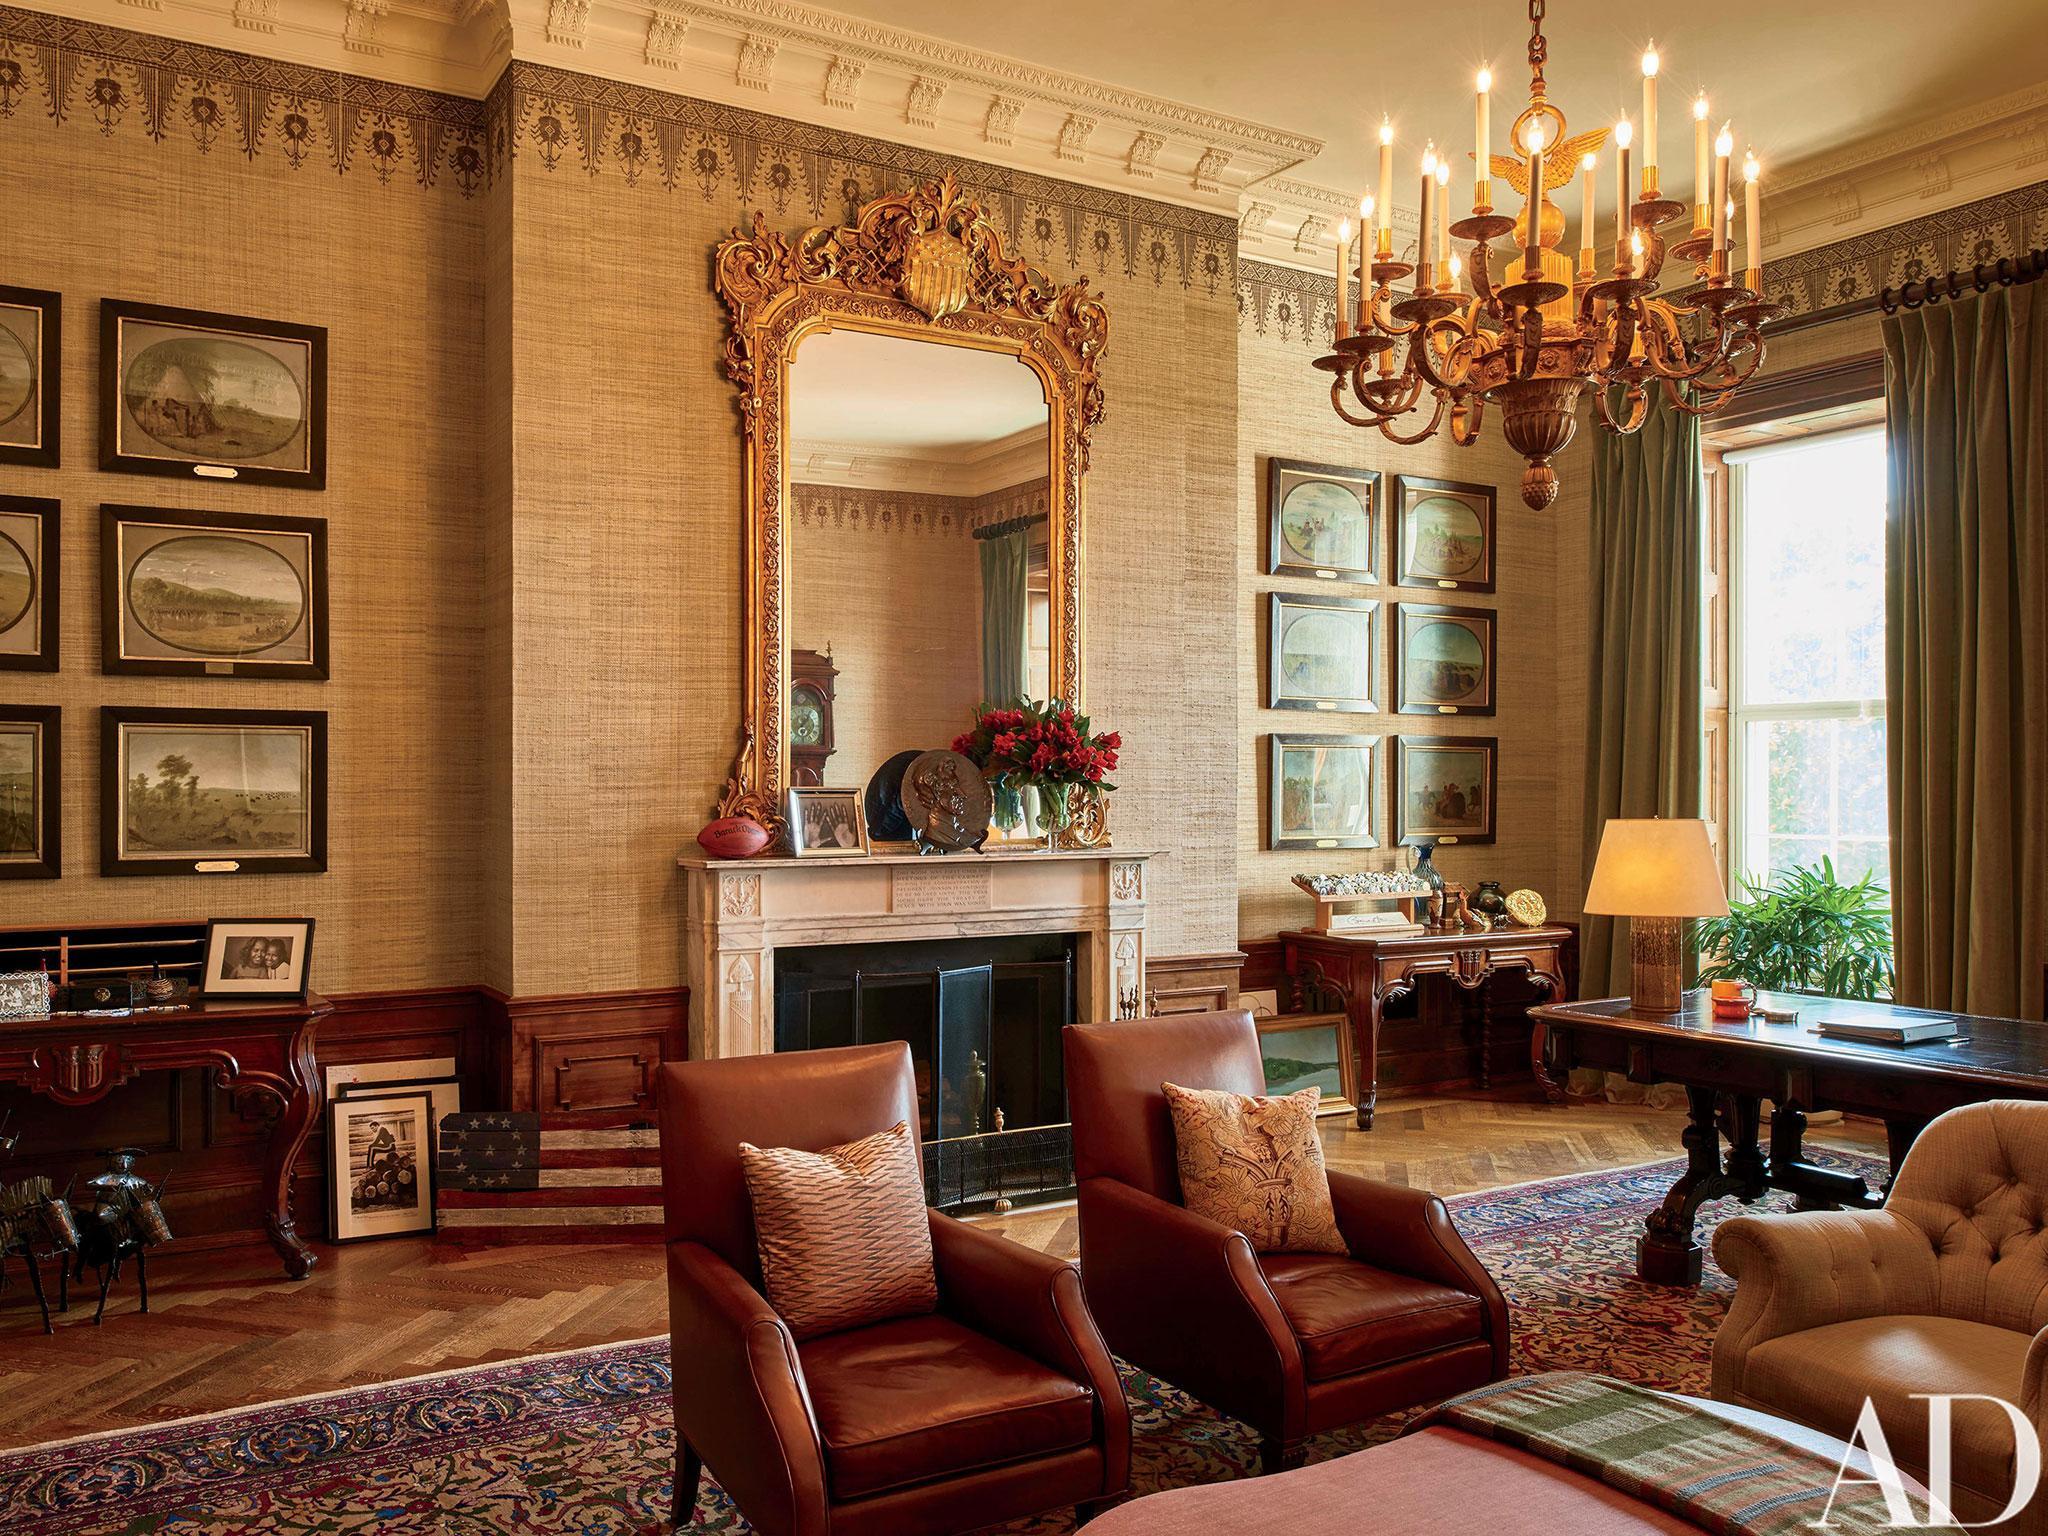 This image provided by Architectural Digest shows The Treaty Room in the White House in Washington